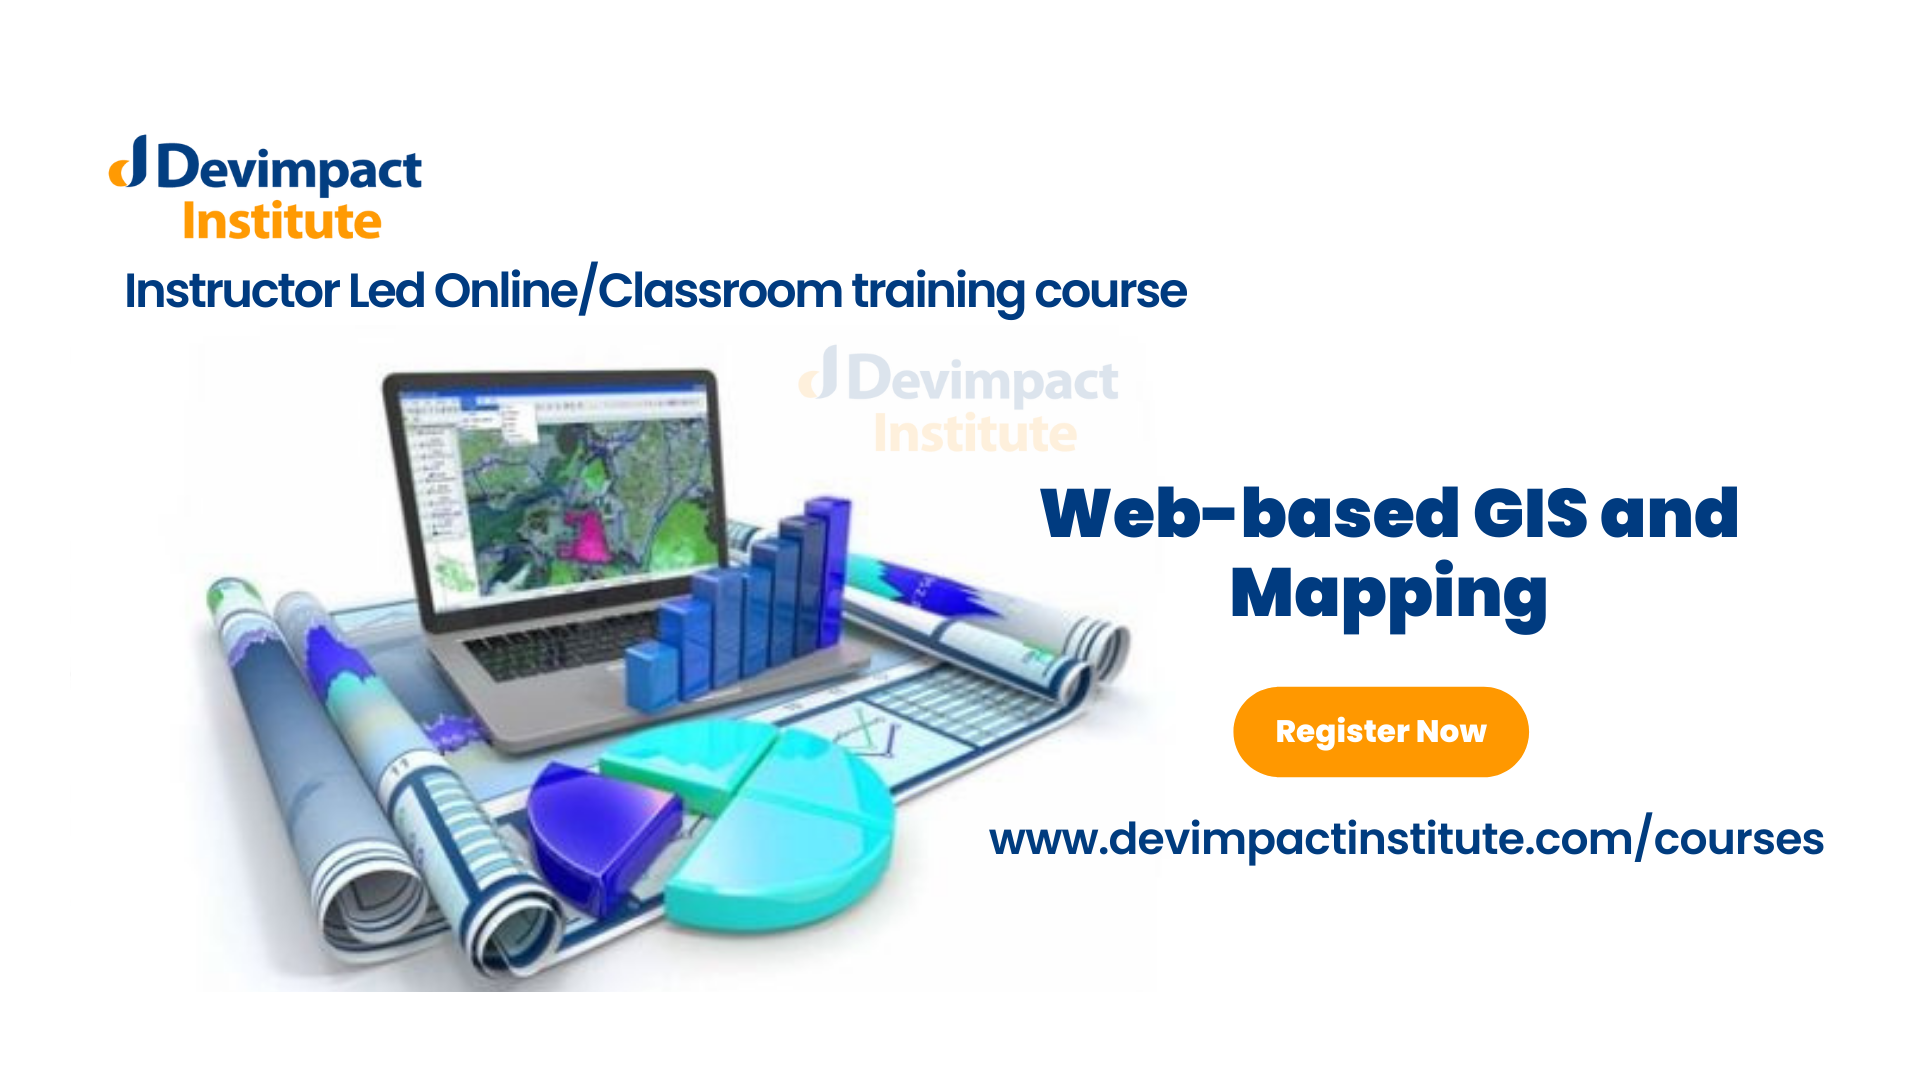 Training on Web-based GIS and Mapping, Online Event